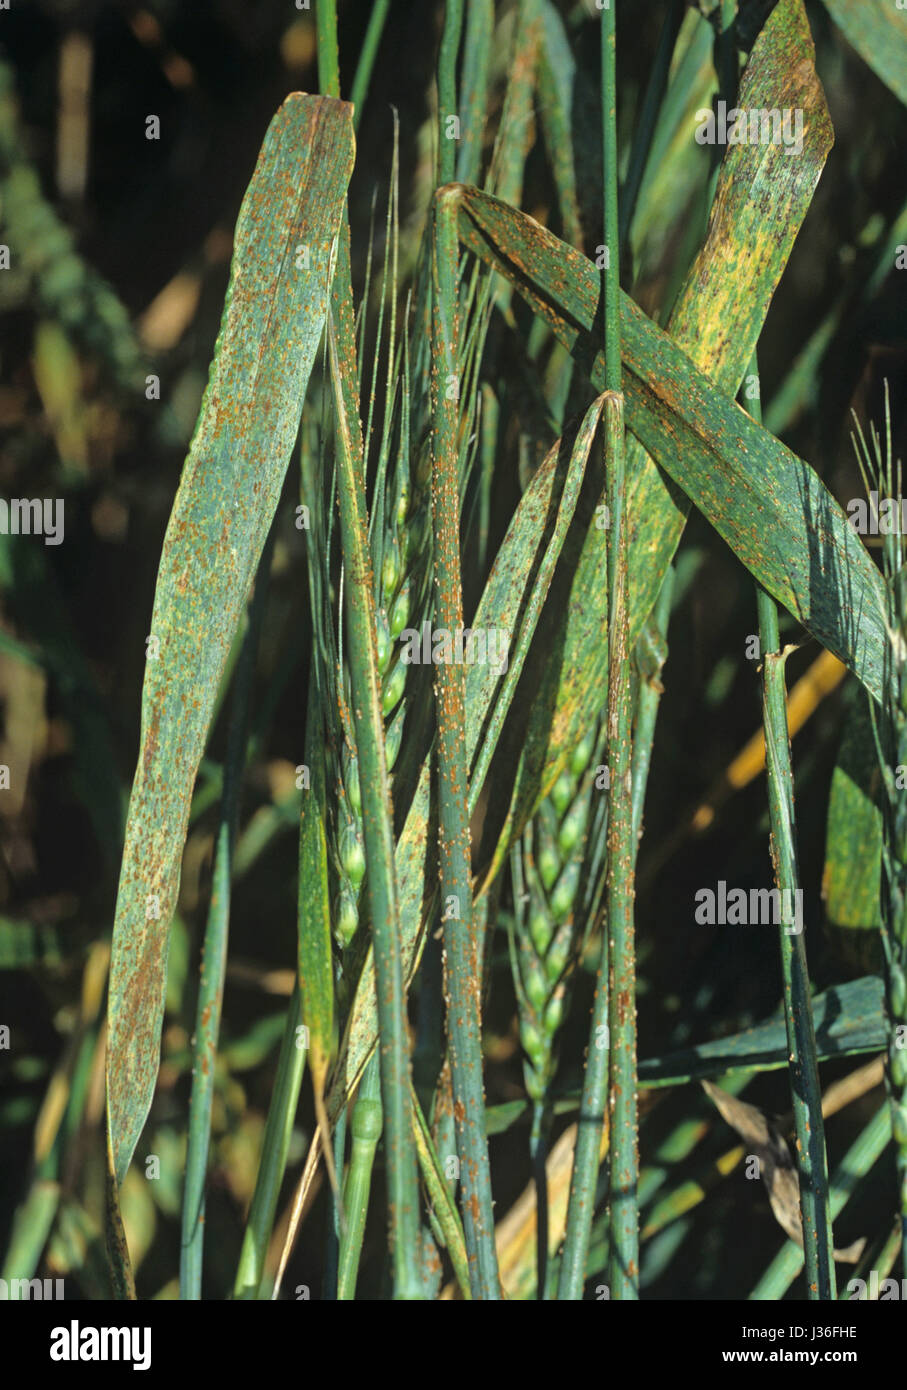 Severe infection black stem rust (Puccinia graminis) on bearded (awned) wheat leaves, stems & ears Stock Photo